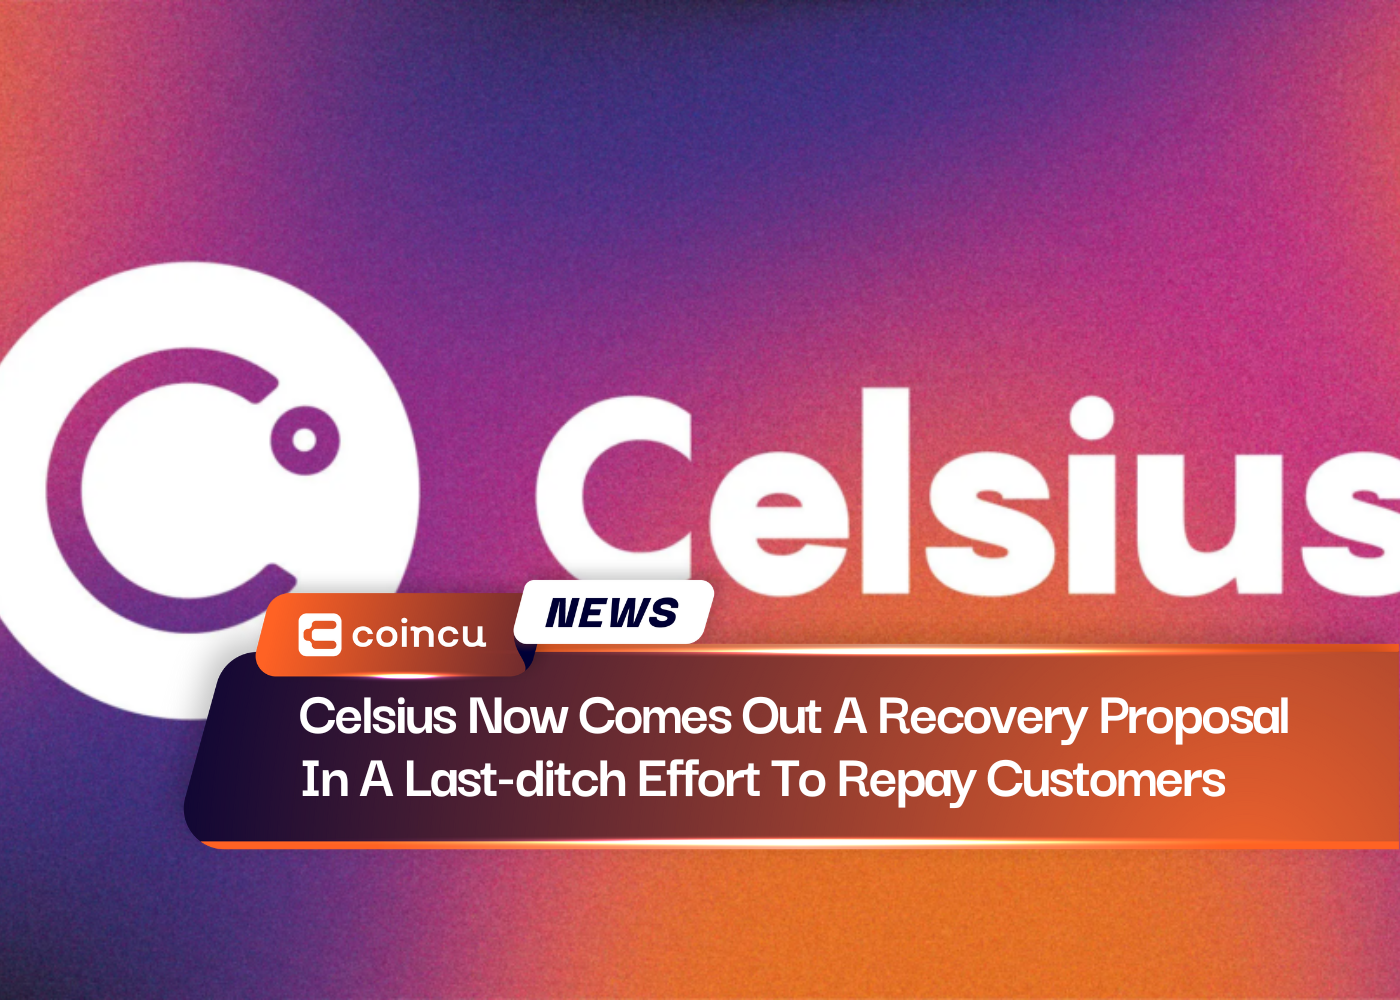 Celsius Now Comes Out A Recovery Proposal In A Last-ditch Effort To Repay Customers